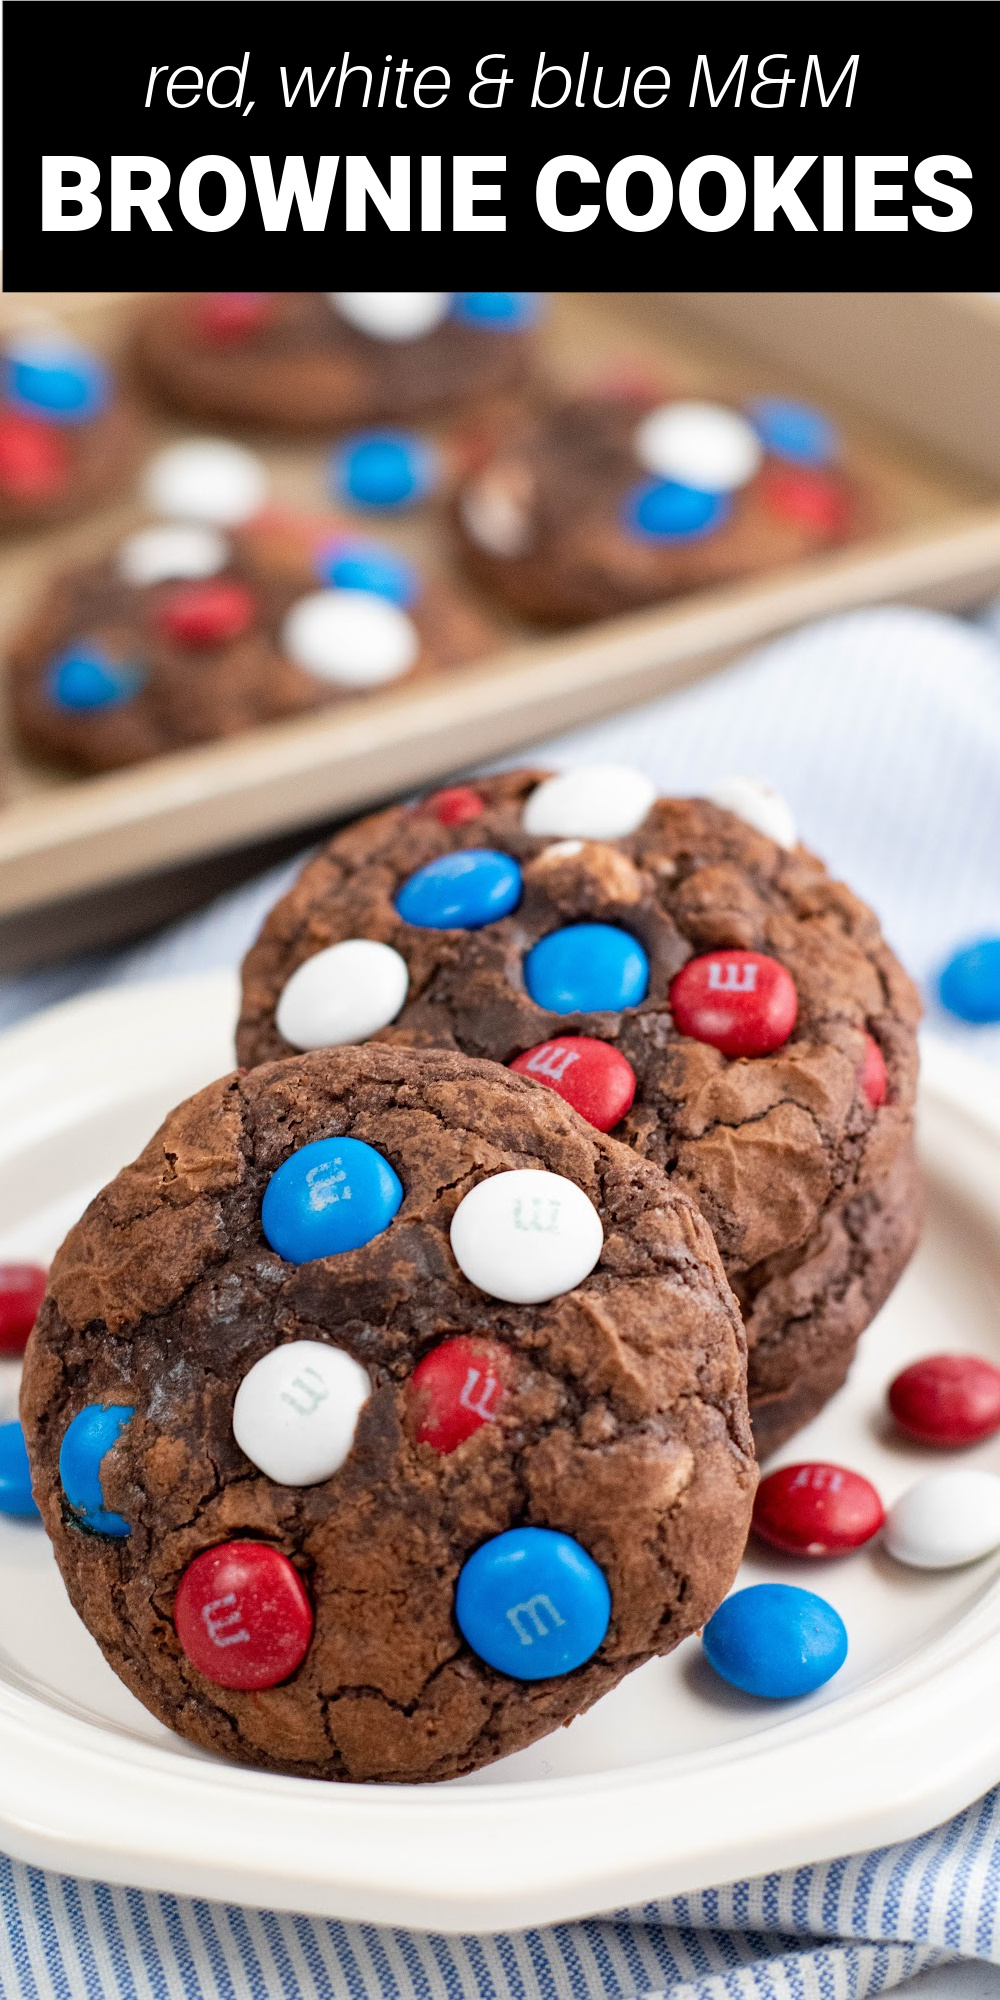 These Red, White & Blue Brownie Cookies are the perfect combination of a chewy brownie and a crispy cookie. This recipe makes super easy and delicious patriotic treats that are bursting with chocolate chips and crunchy candy in every single bite!